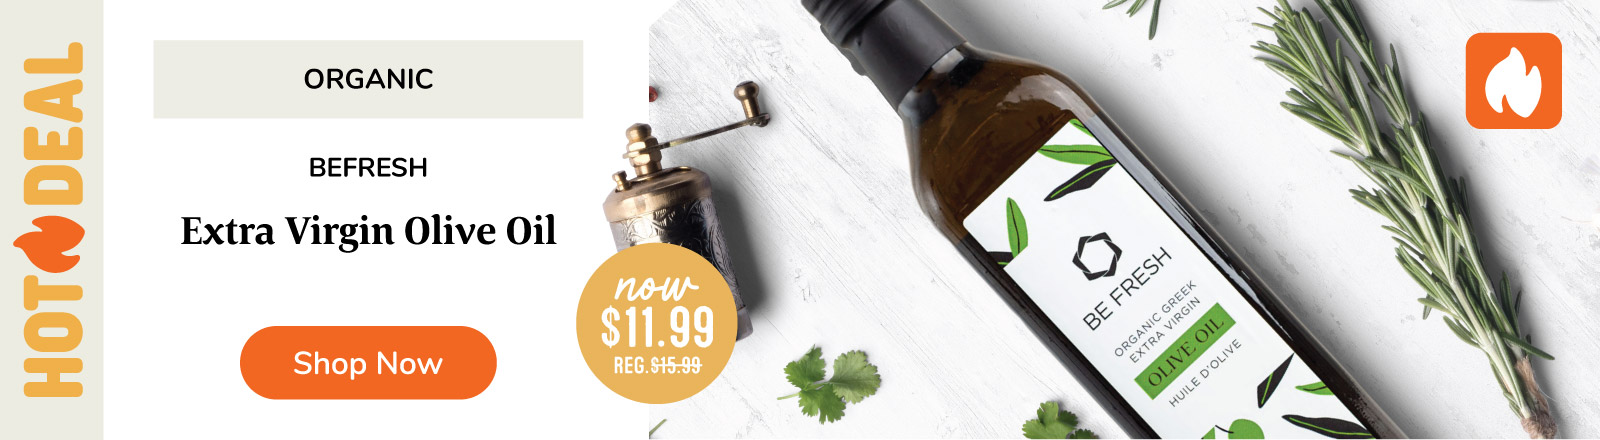 Be Fresh Organic Olive Oil is On Sale! 